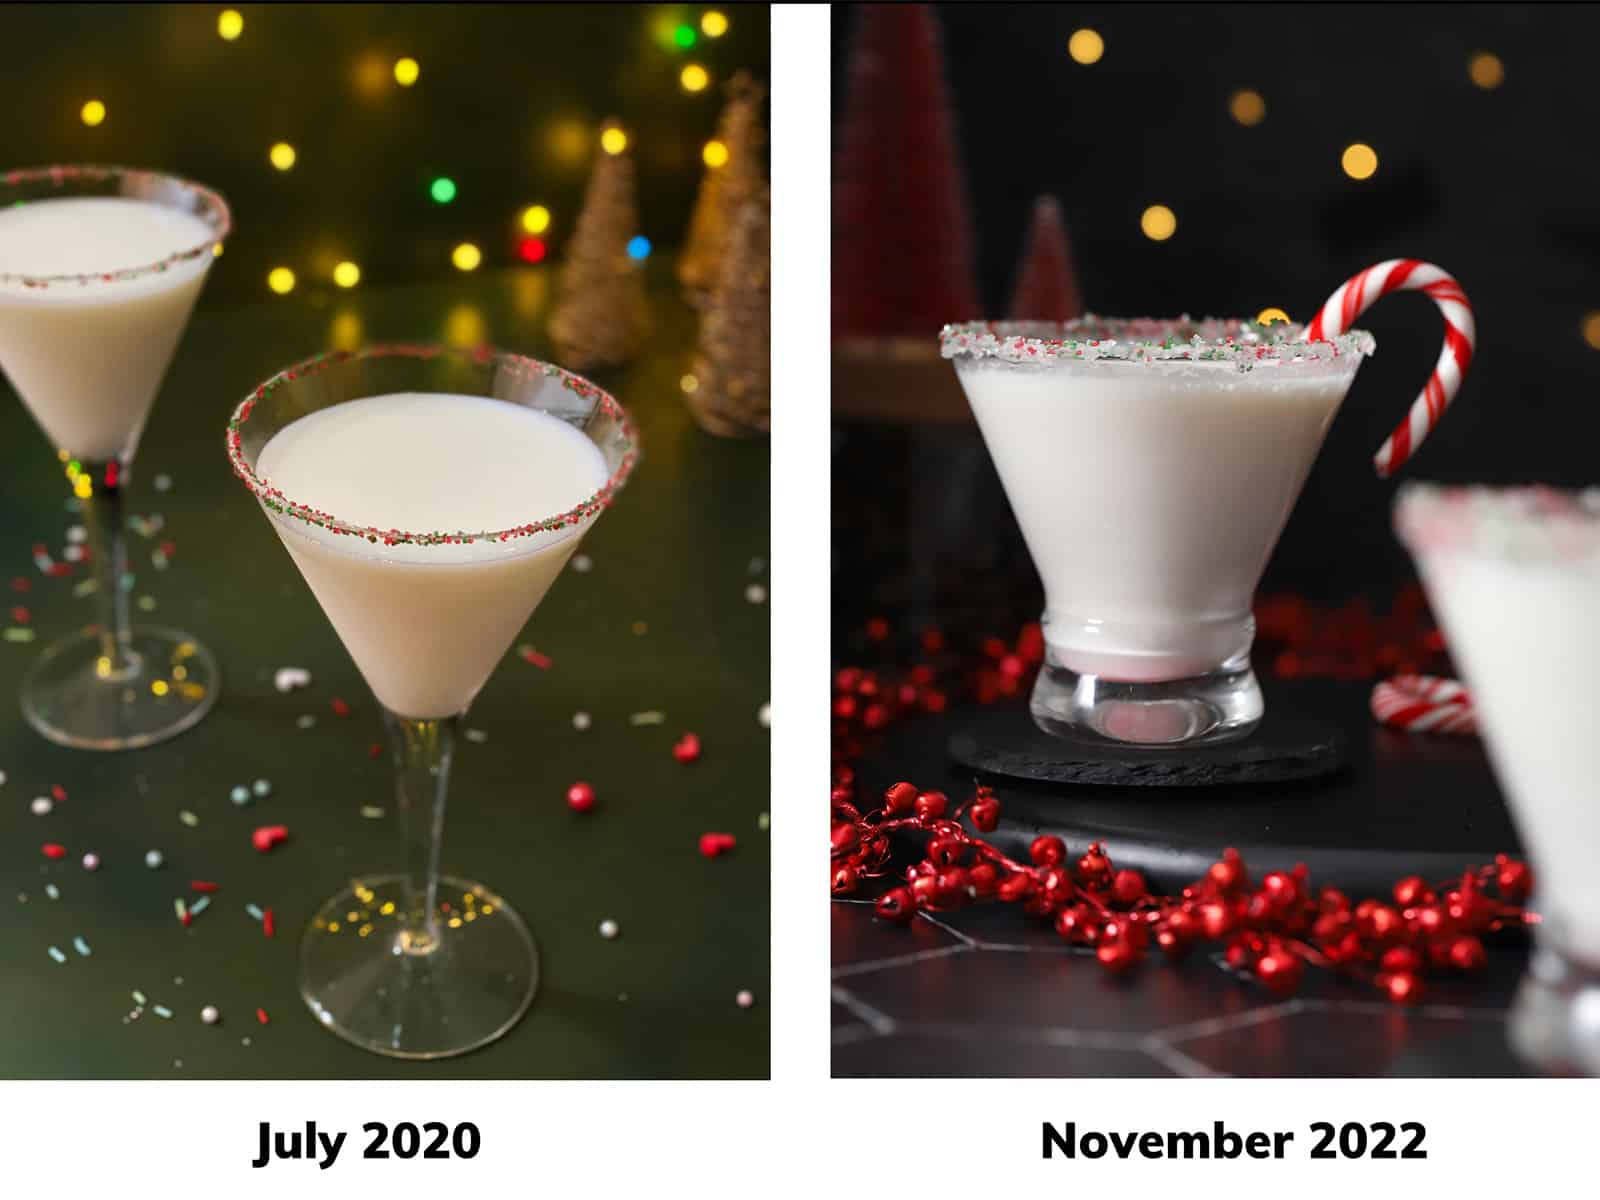 Then and now photo comparison for my candy cane martinis.